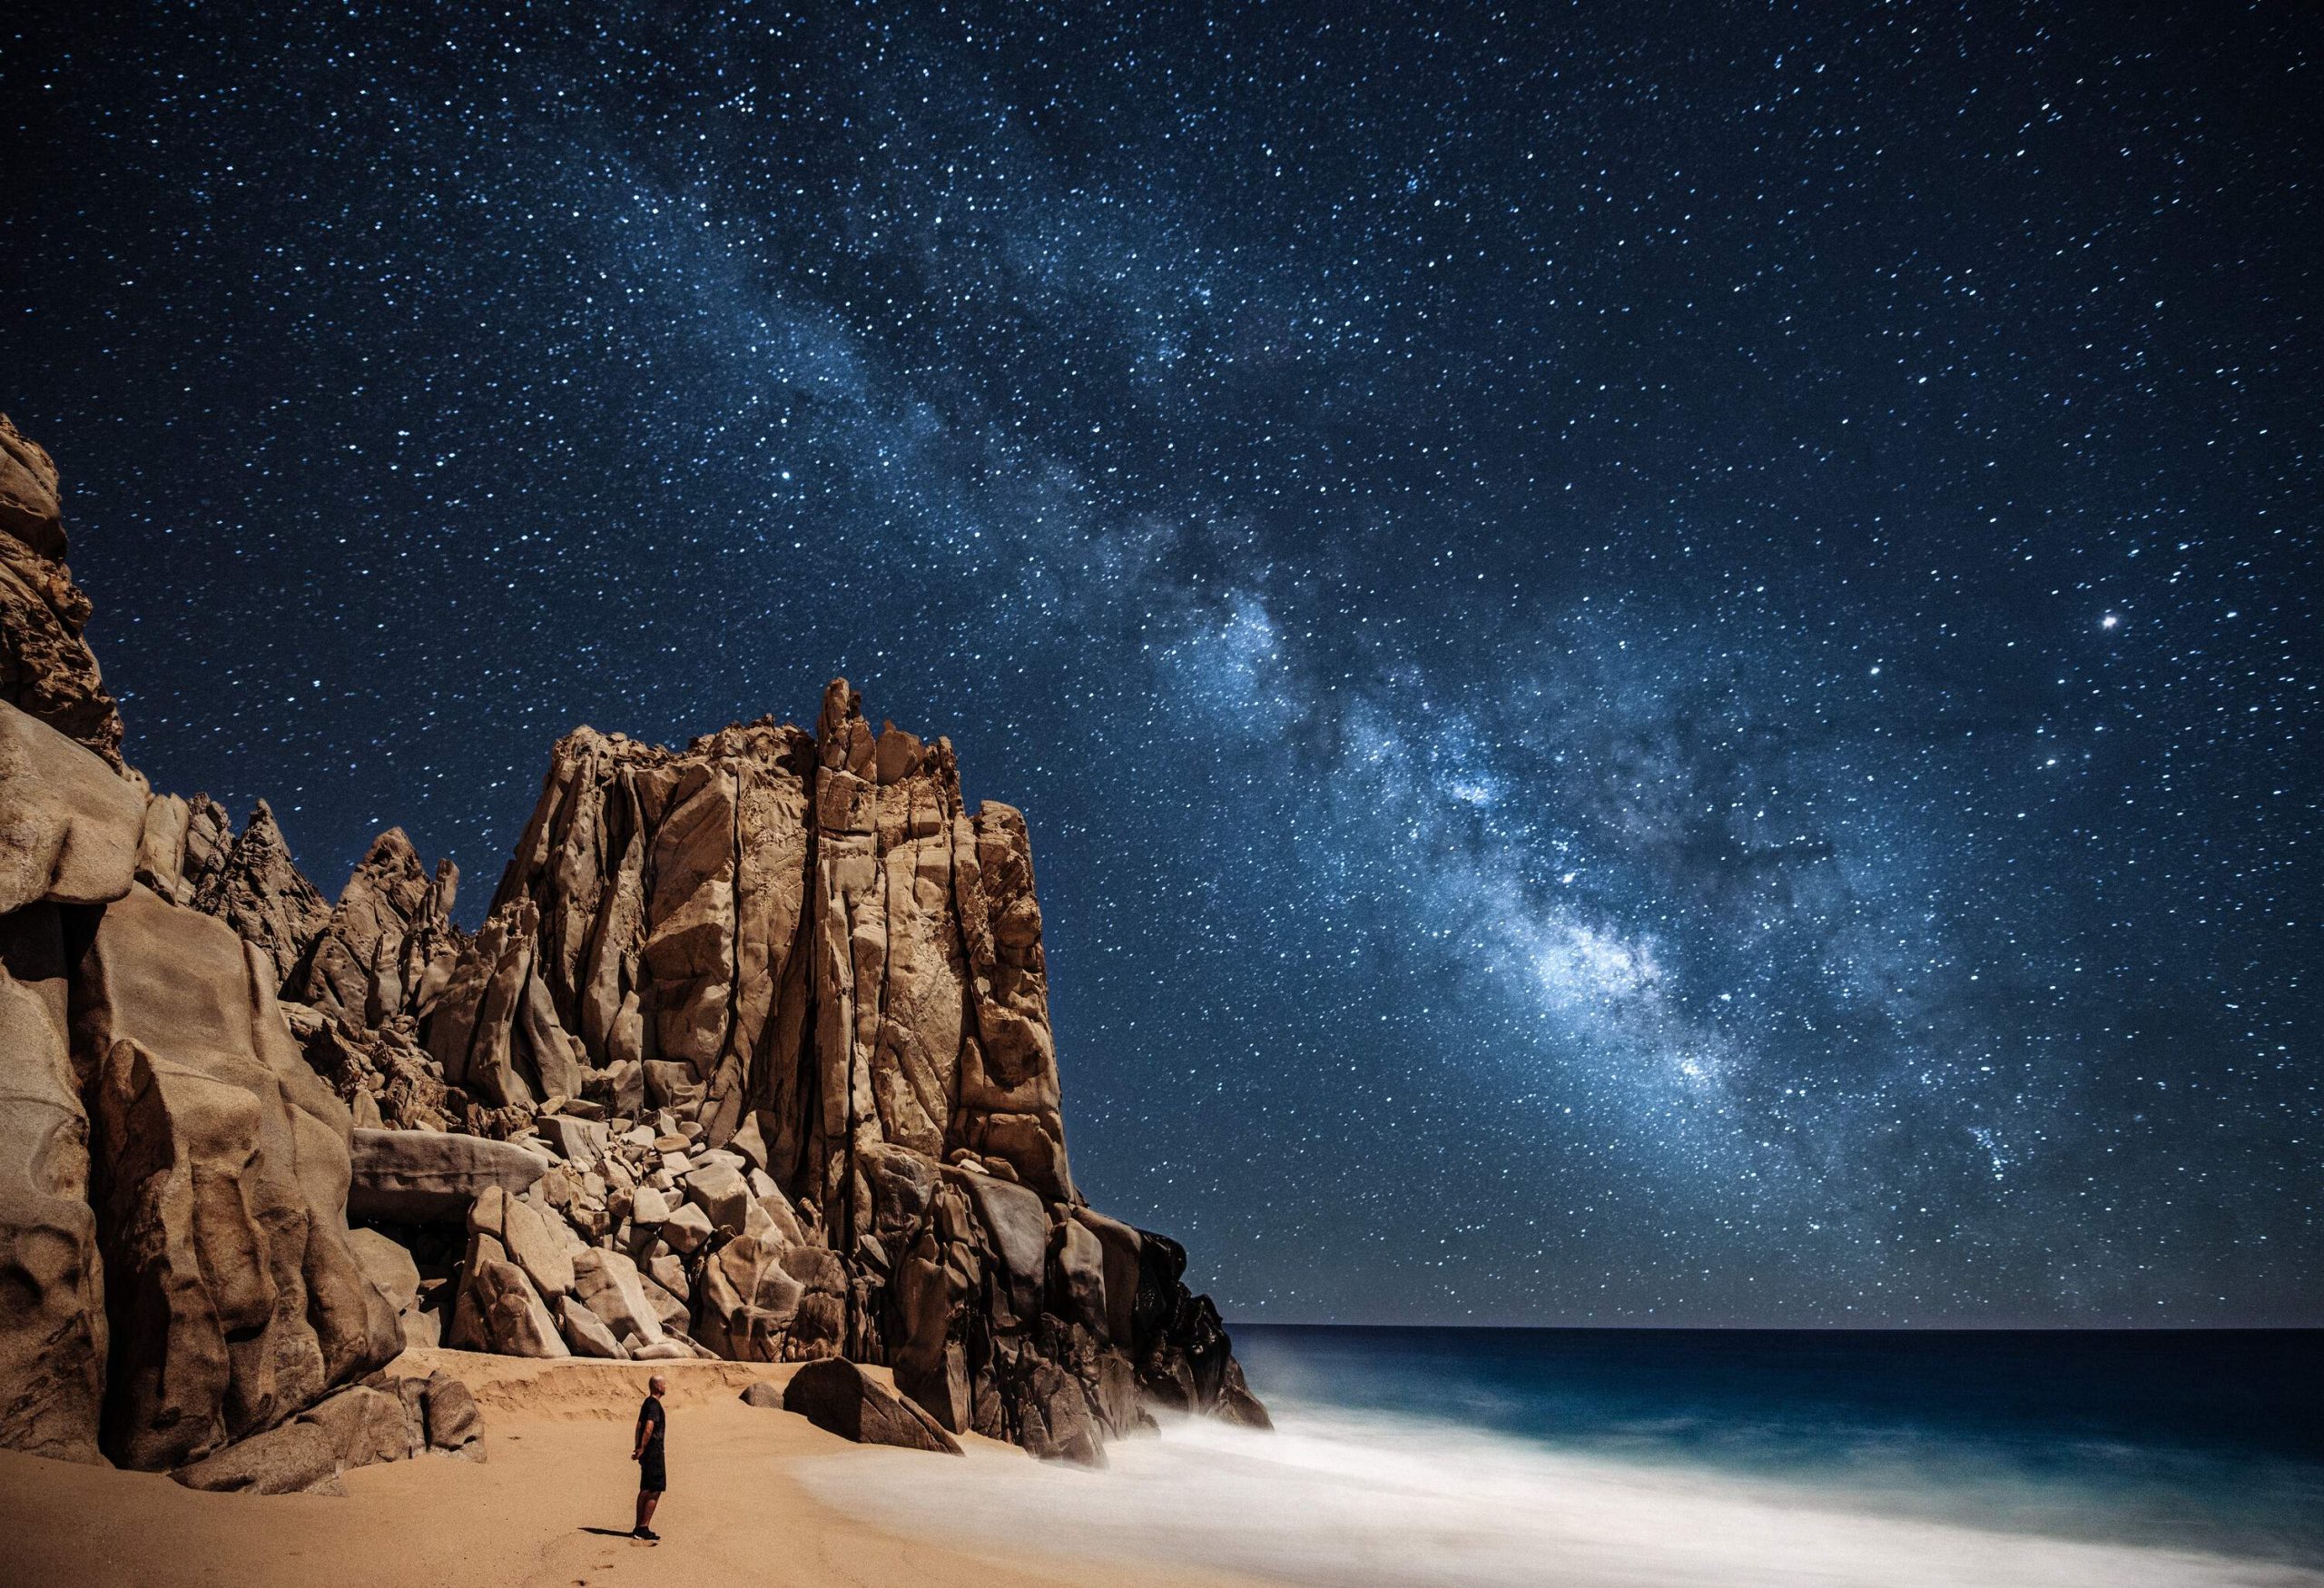 A man gazes at the stars in the calm sky on a scenic beach along steep, rugged rocks.